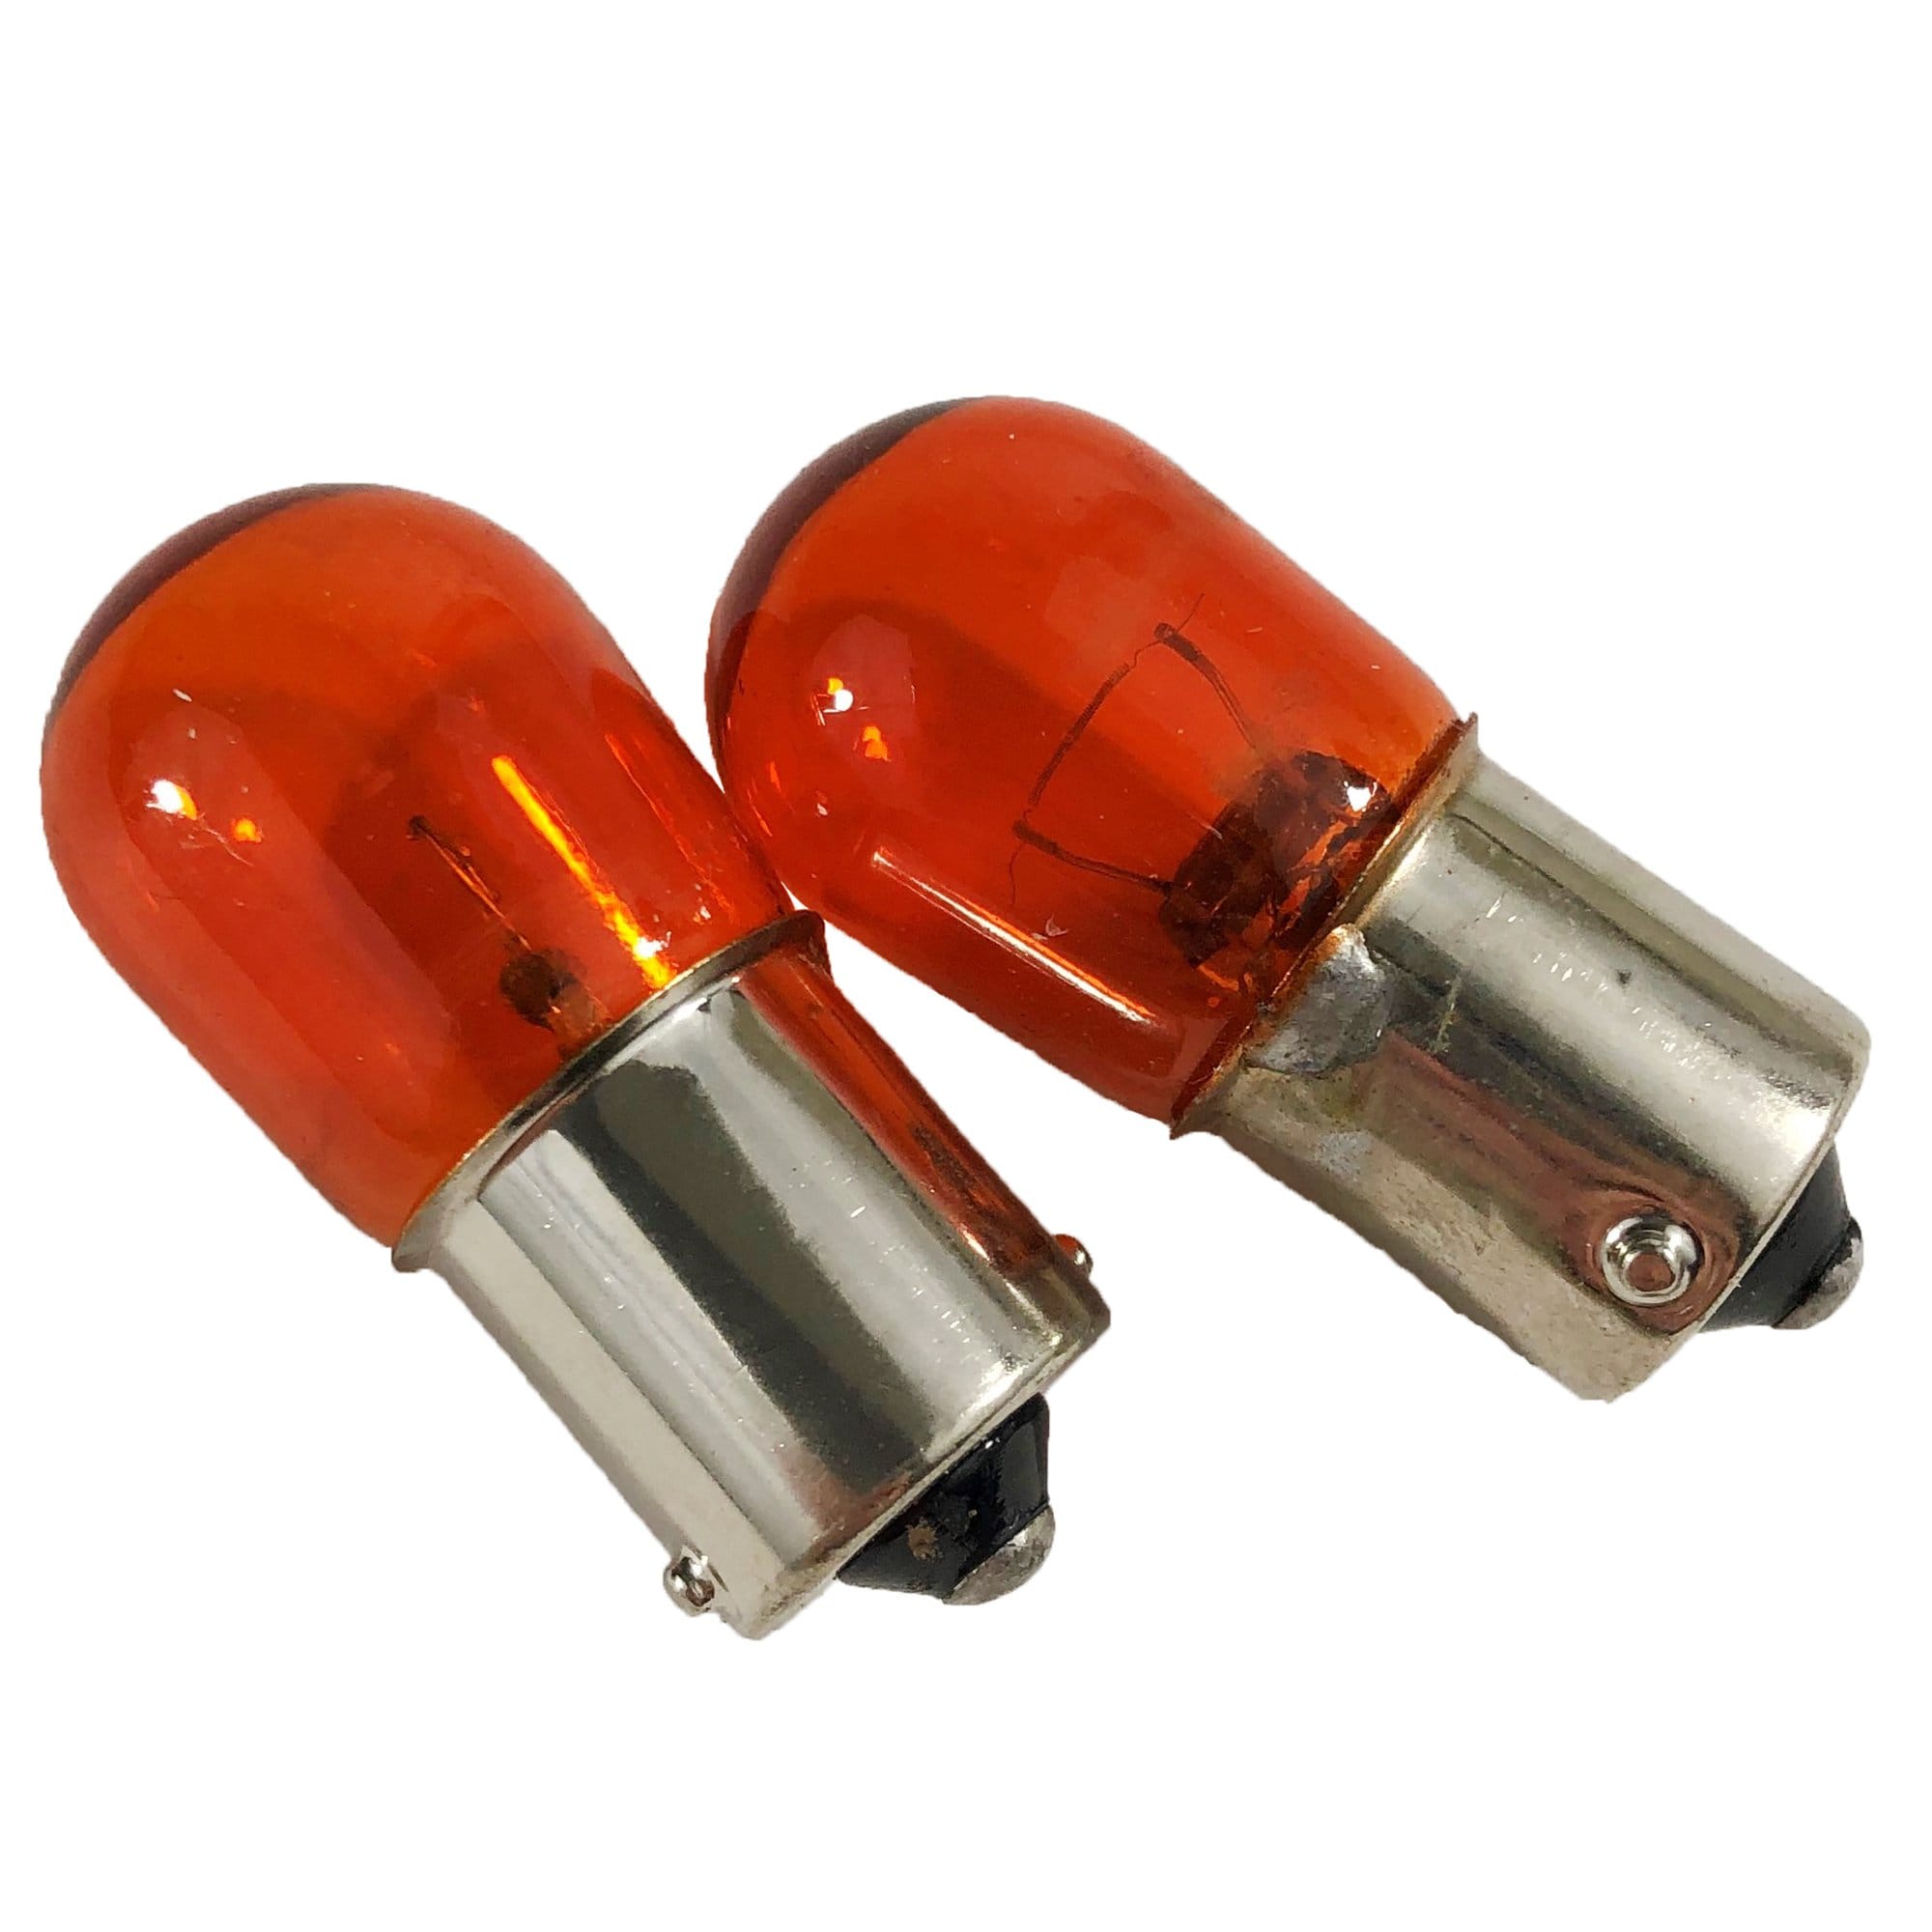 AP Products 016-AB10 BAY15D Base Amber S8 Anti Bug Incandescent Bulbs (1383)